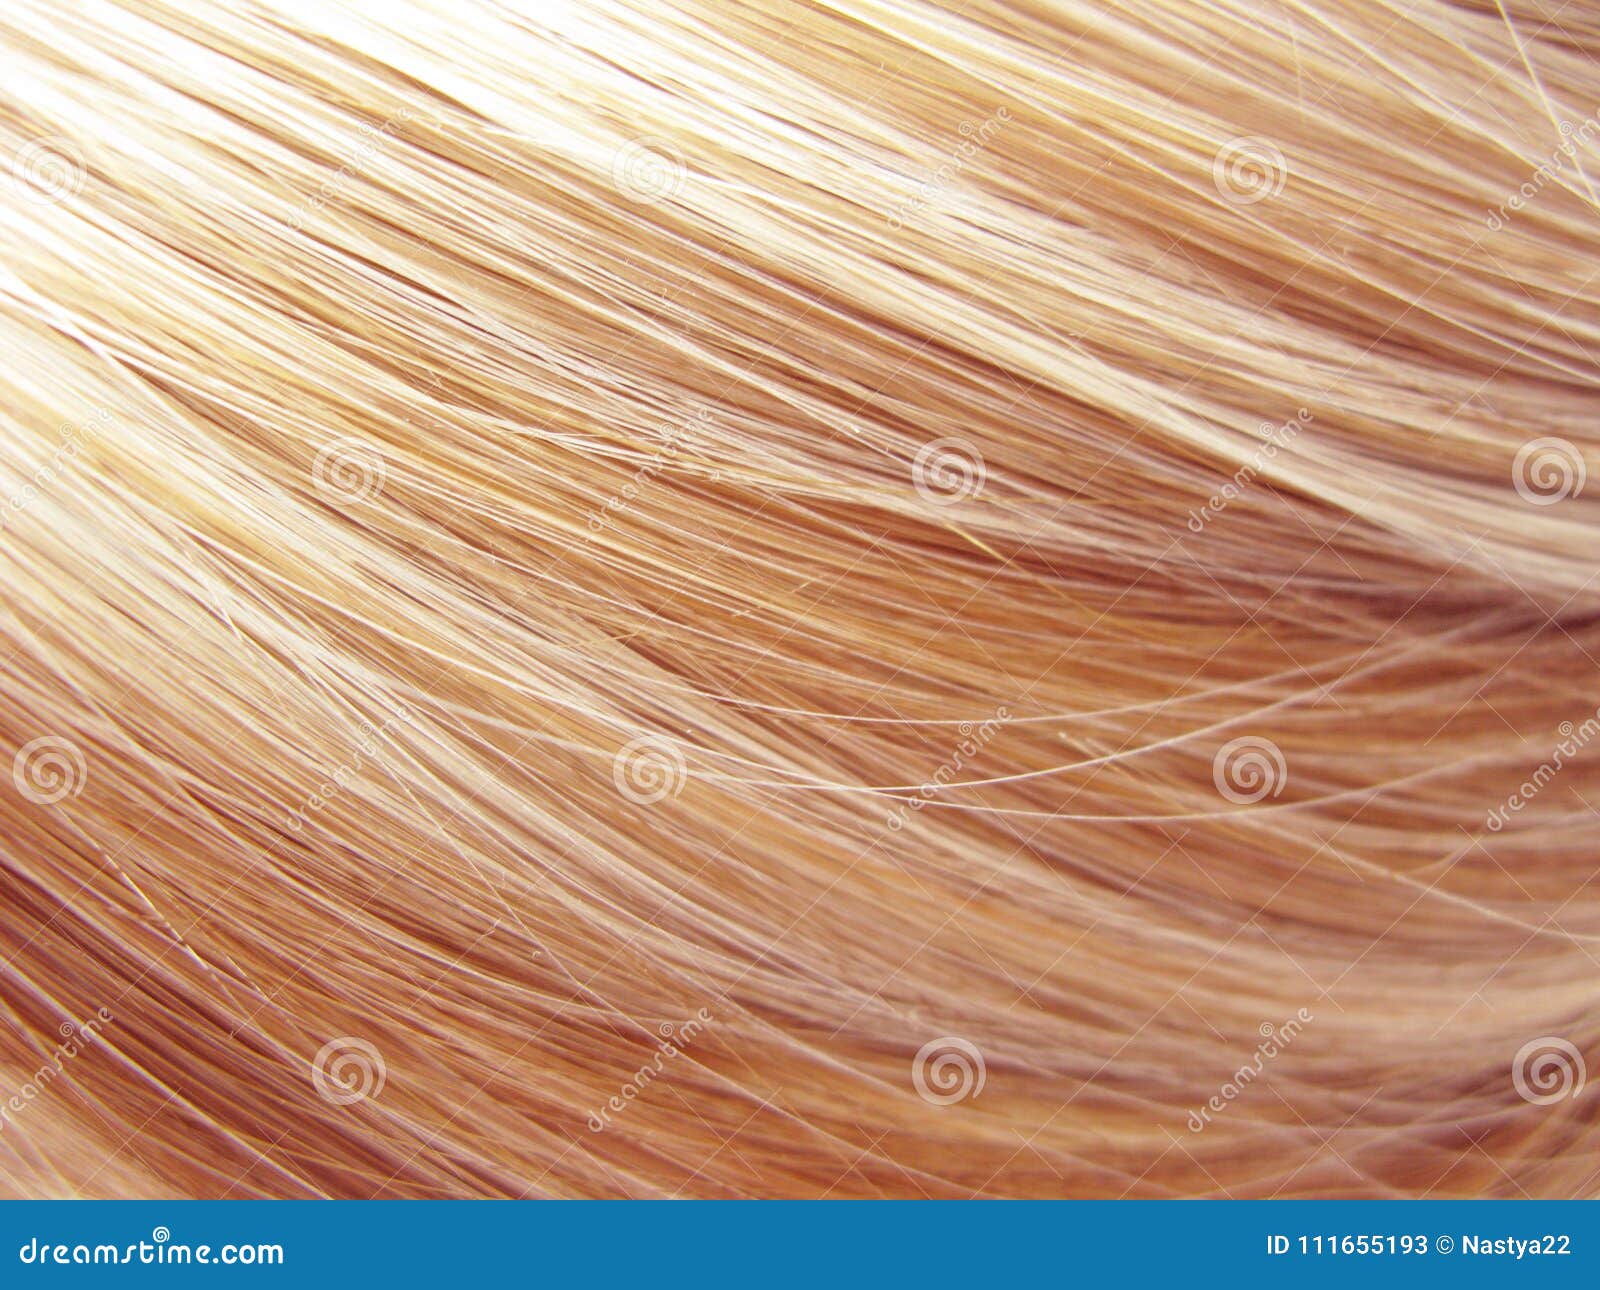 1. "How to Achieve a Cold Blond Highlight Hair Look" - wide 10